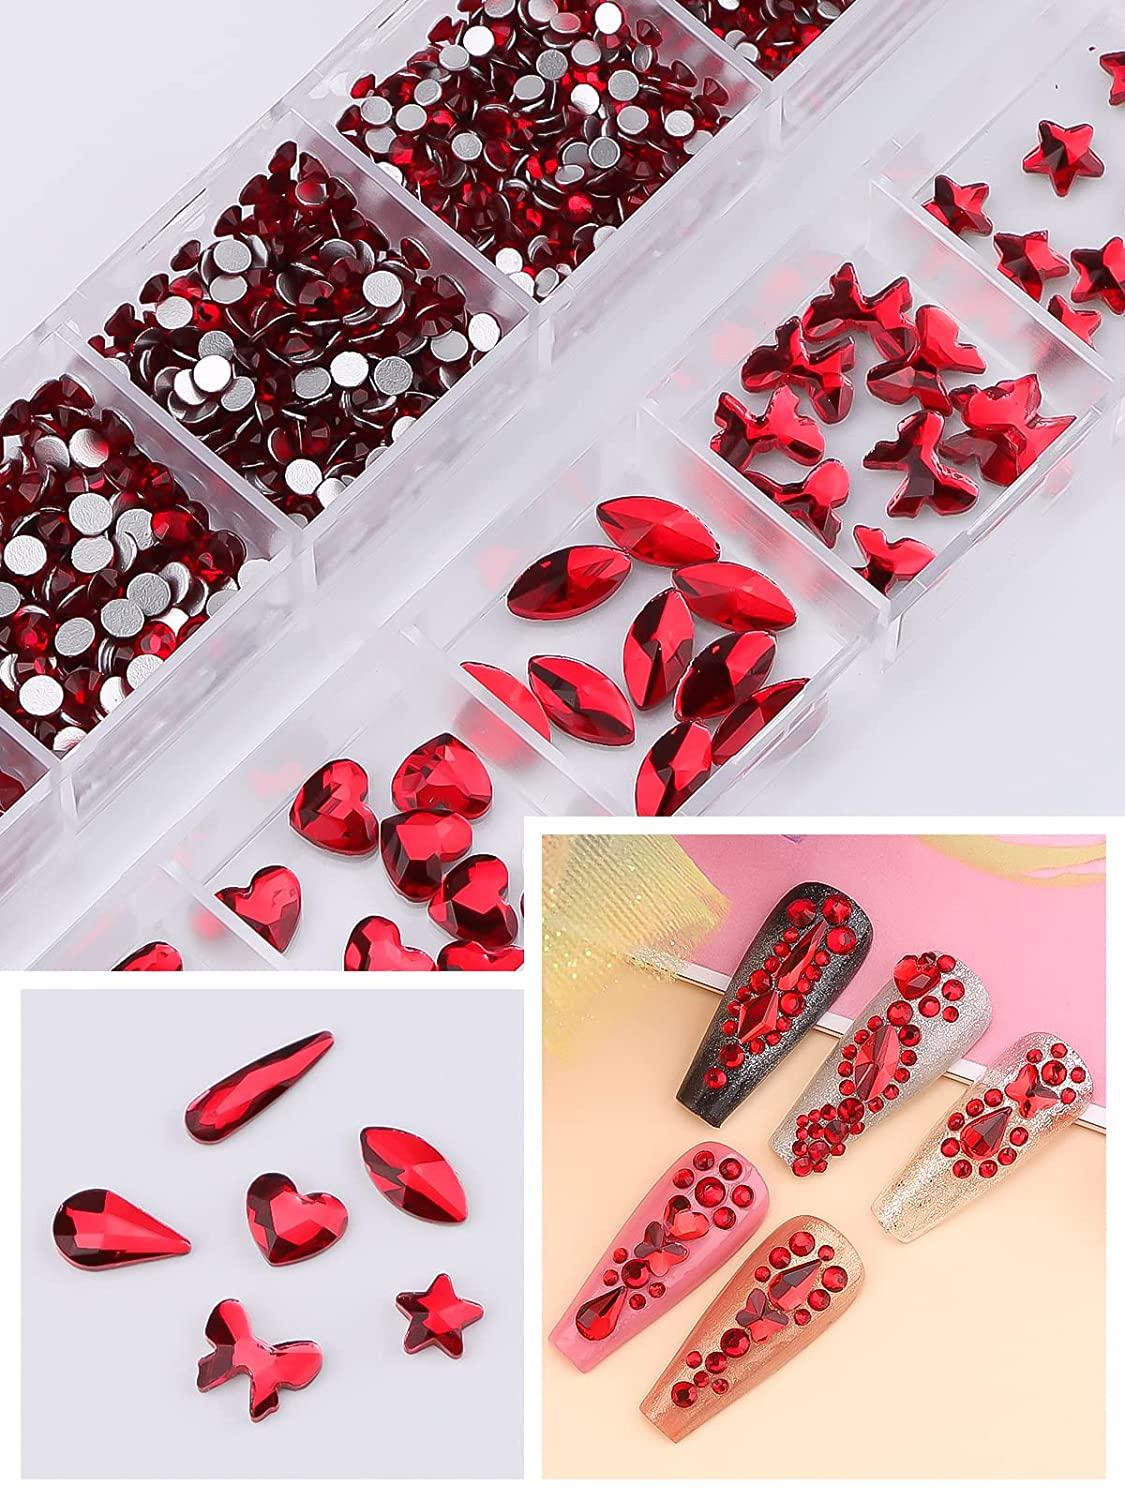 5pcs Red Nail Rhinestones Glitter Crystal Rhinestones Top Glass Decorations  Gems for New Year Christmas Nail Art Accessories - AliExpress